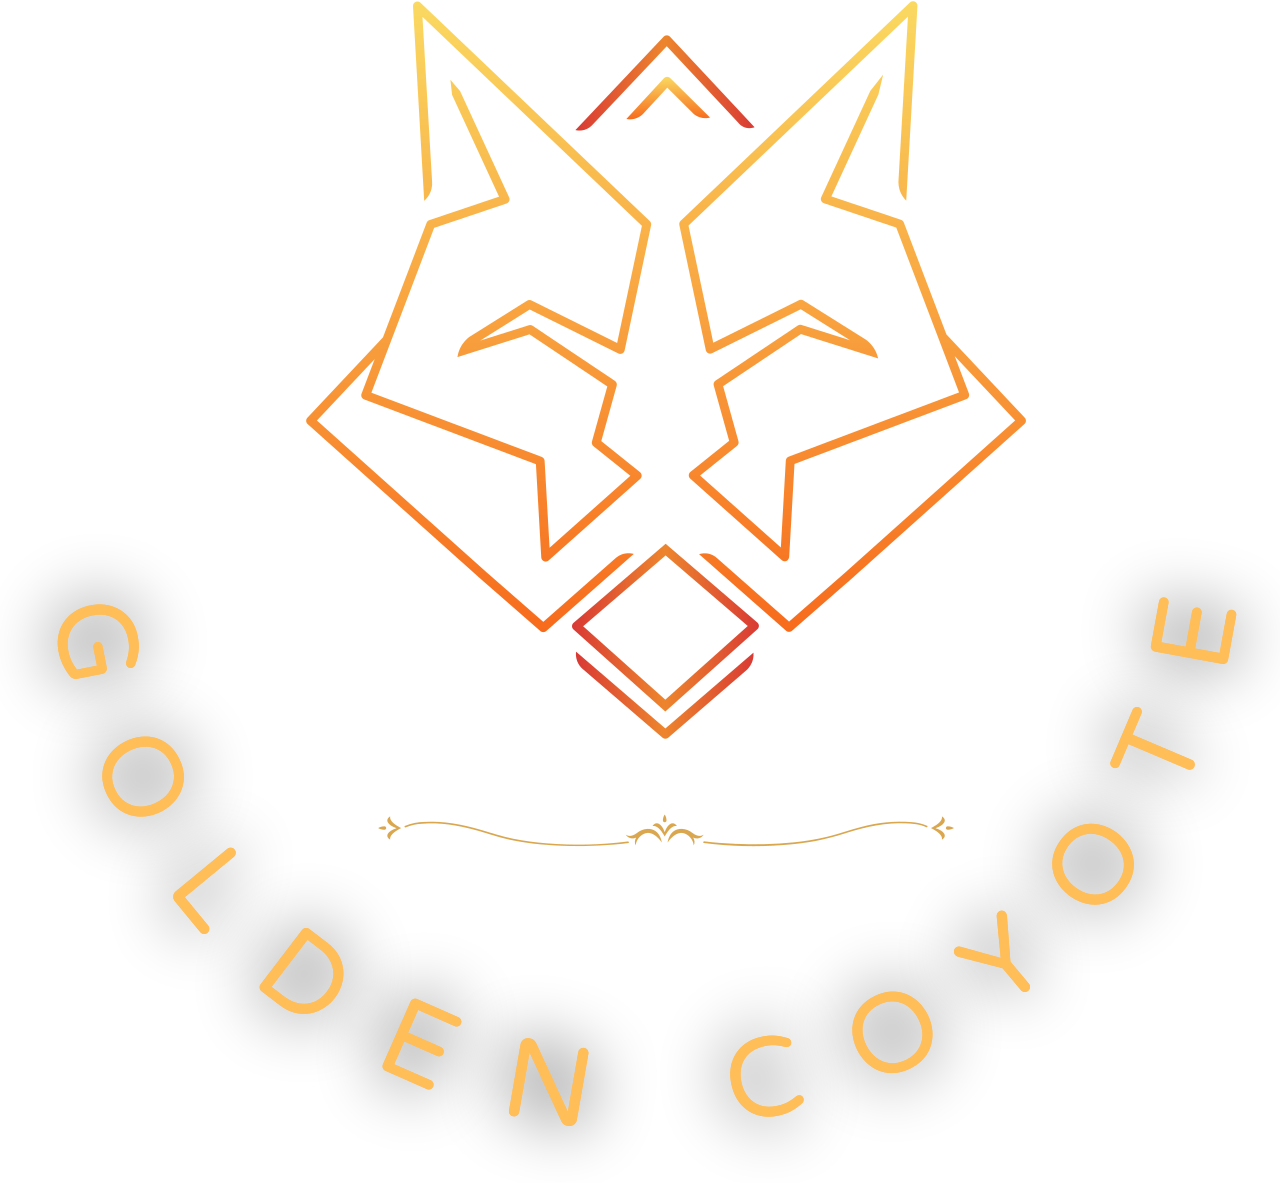 Golden Coyote's web page